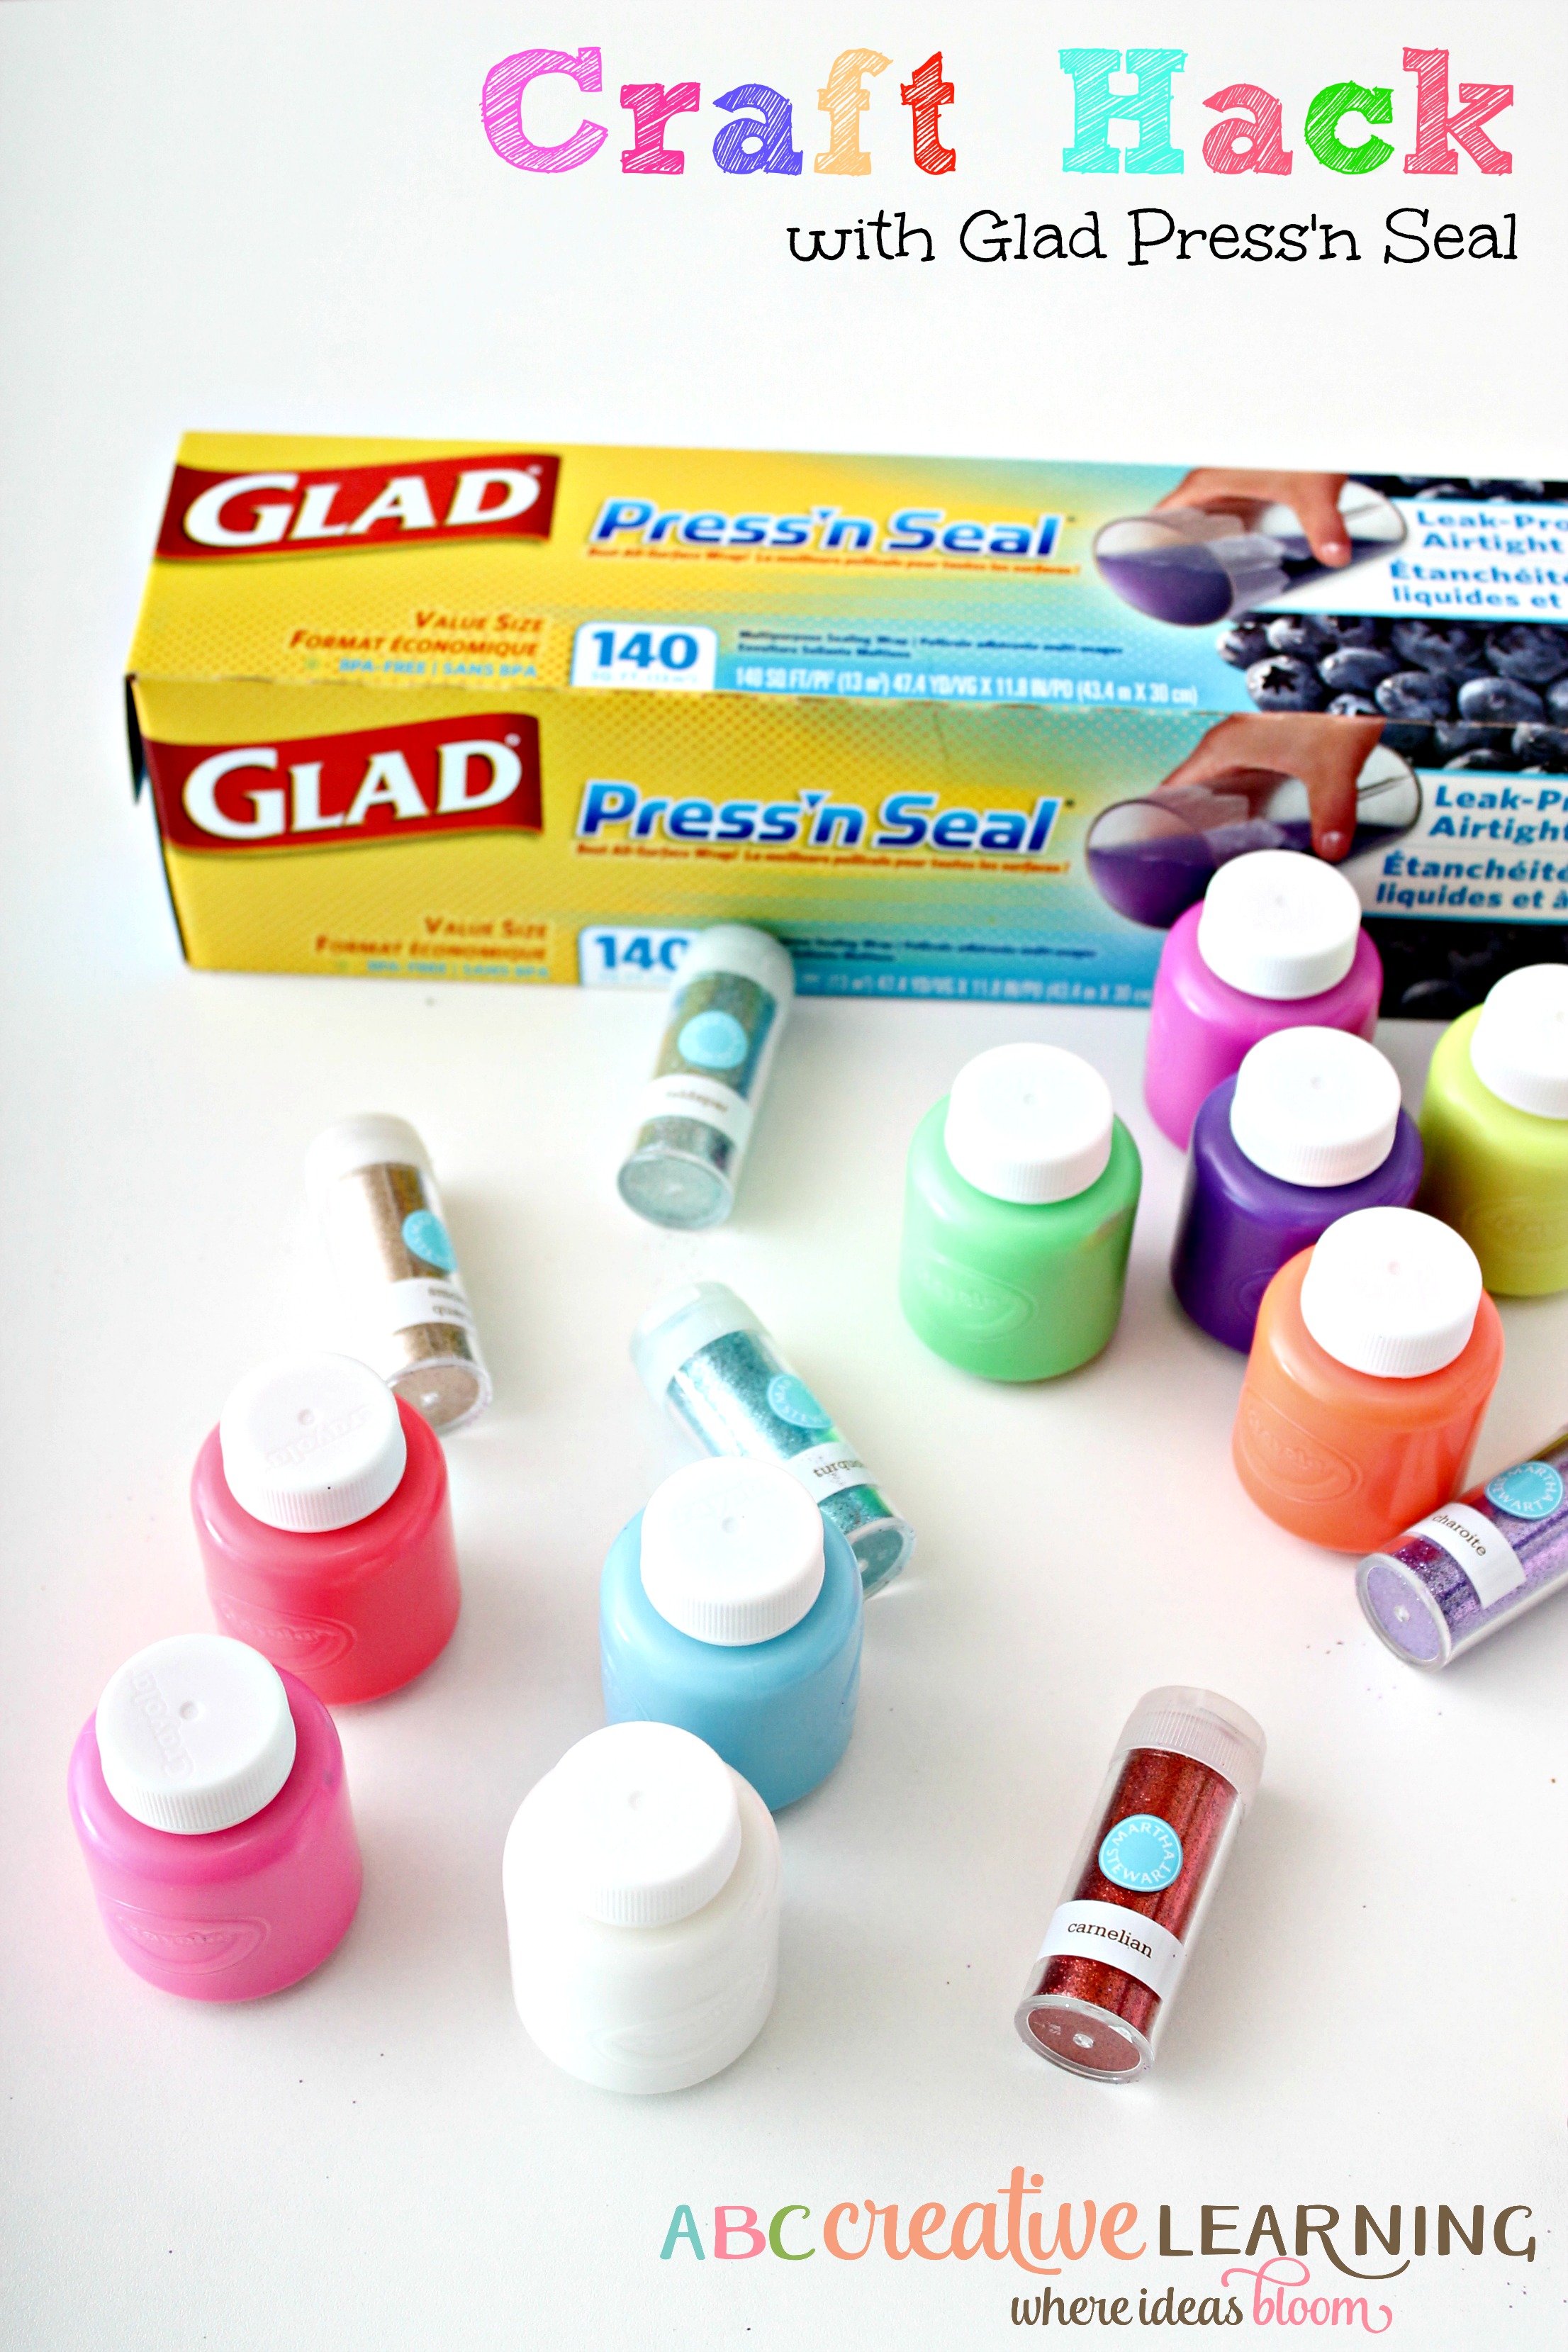 Keep Food Fresh with Glad Press'n Seal - Mommy Hates Cooking